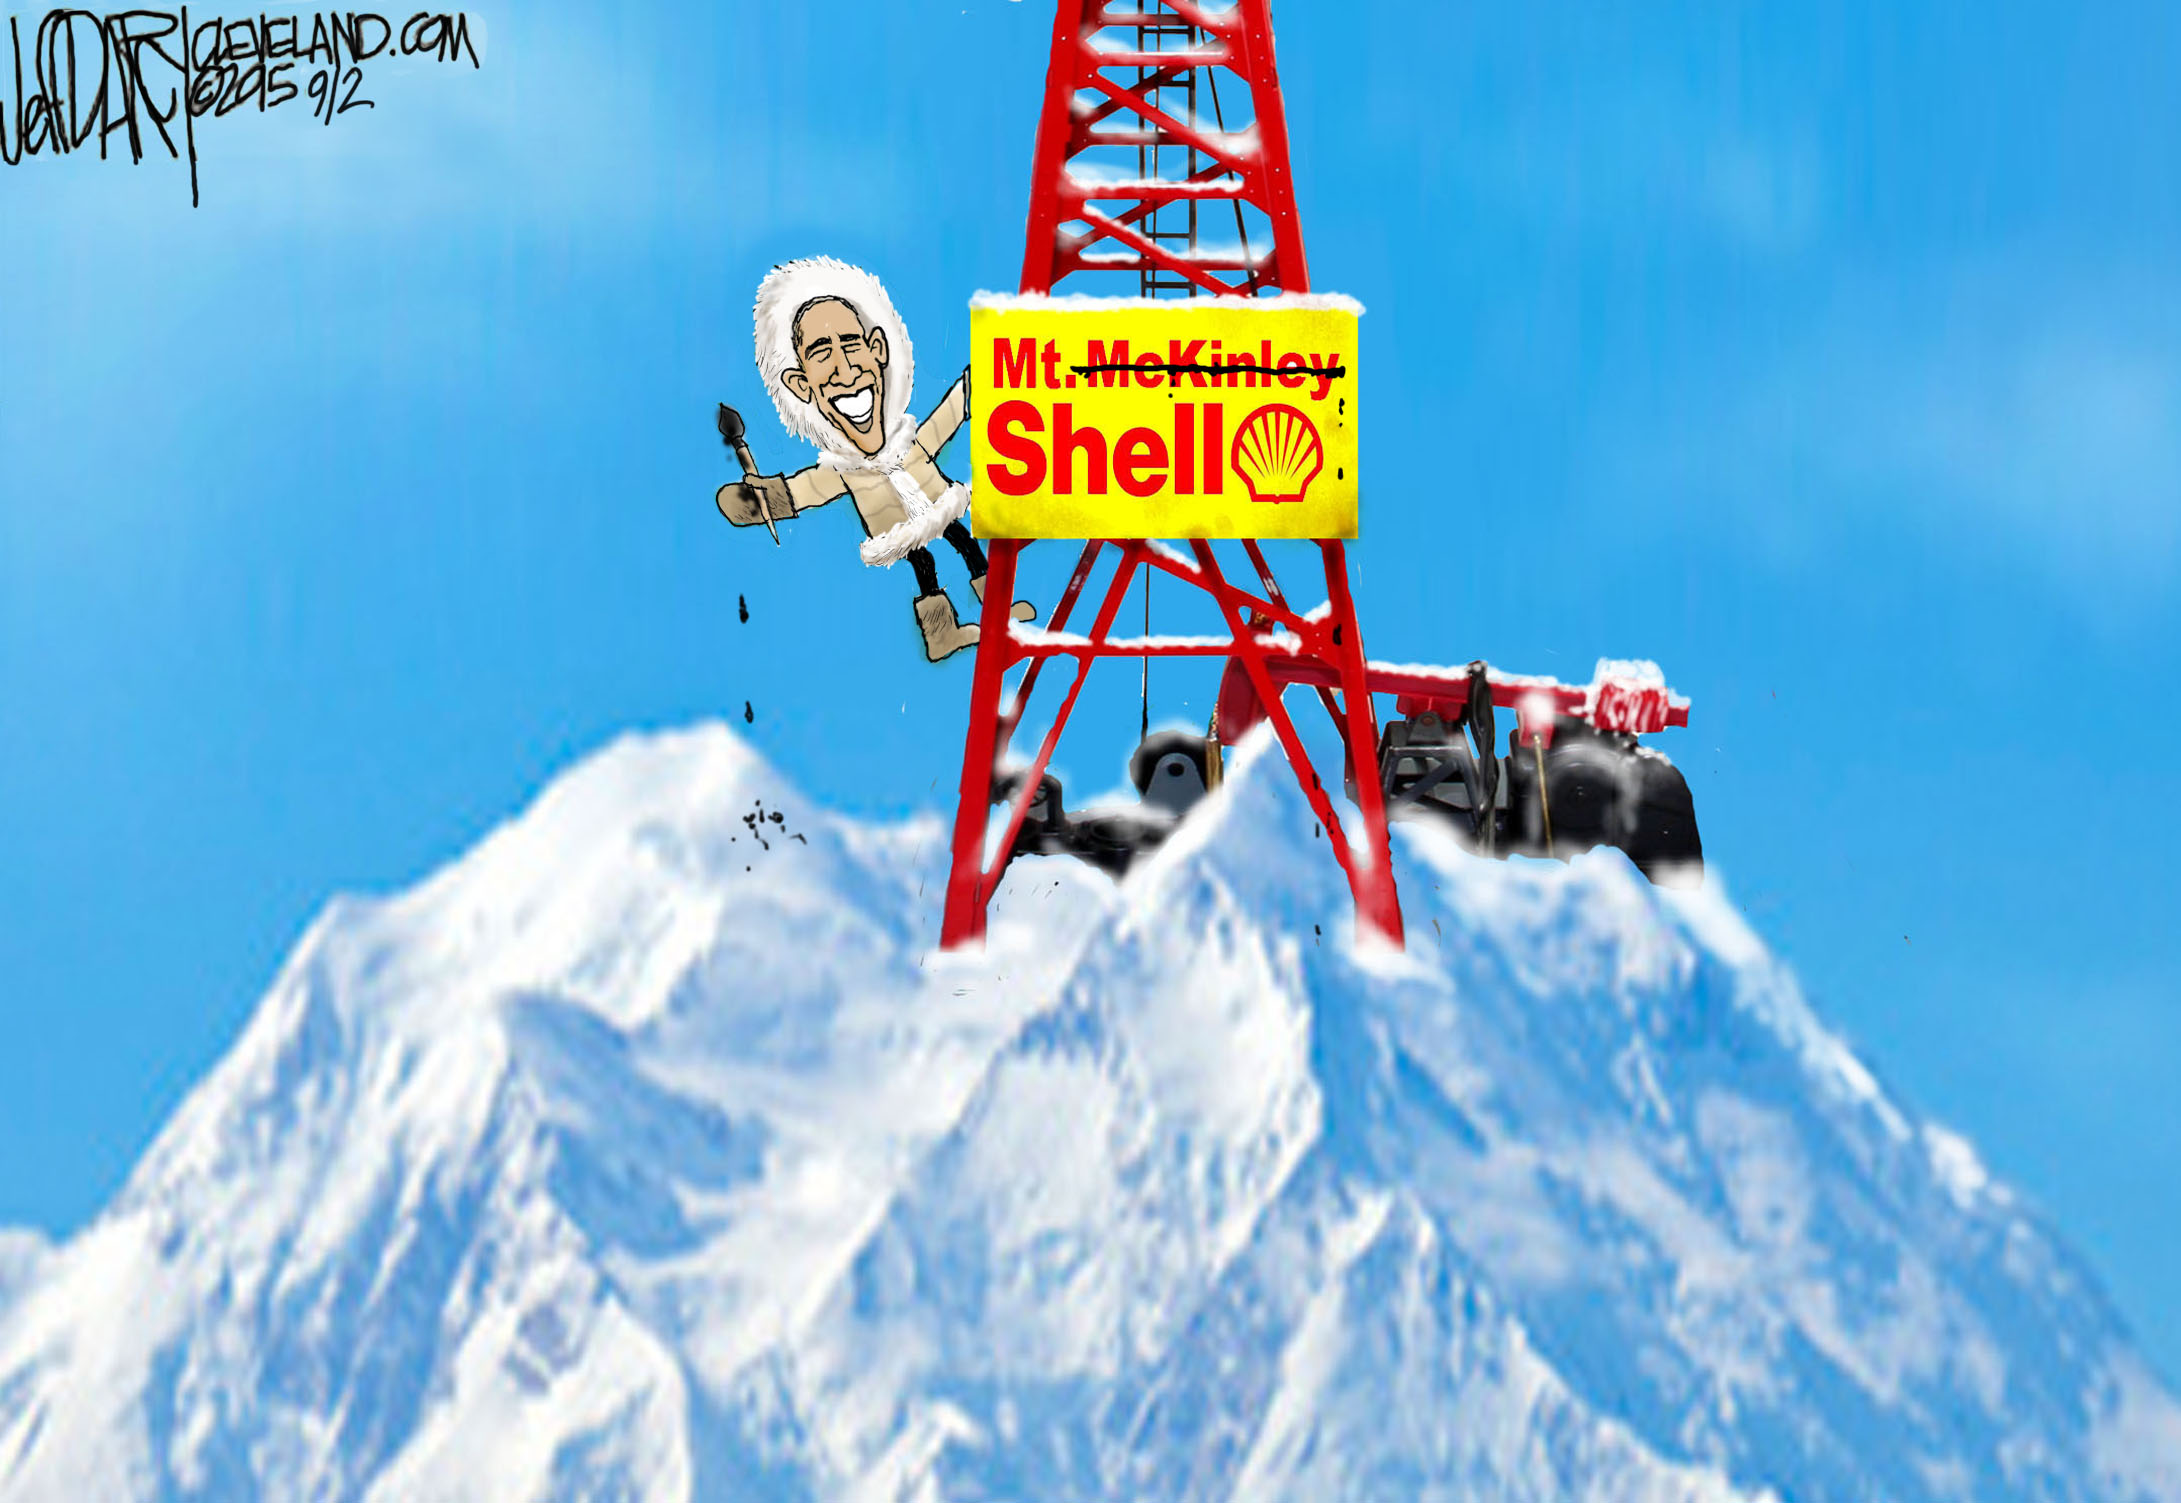 Mt. McKinley's New Name. Jeff Darcy. Via Cagle Cartoons. Used with permission.